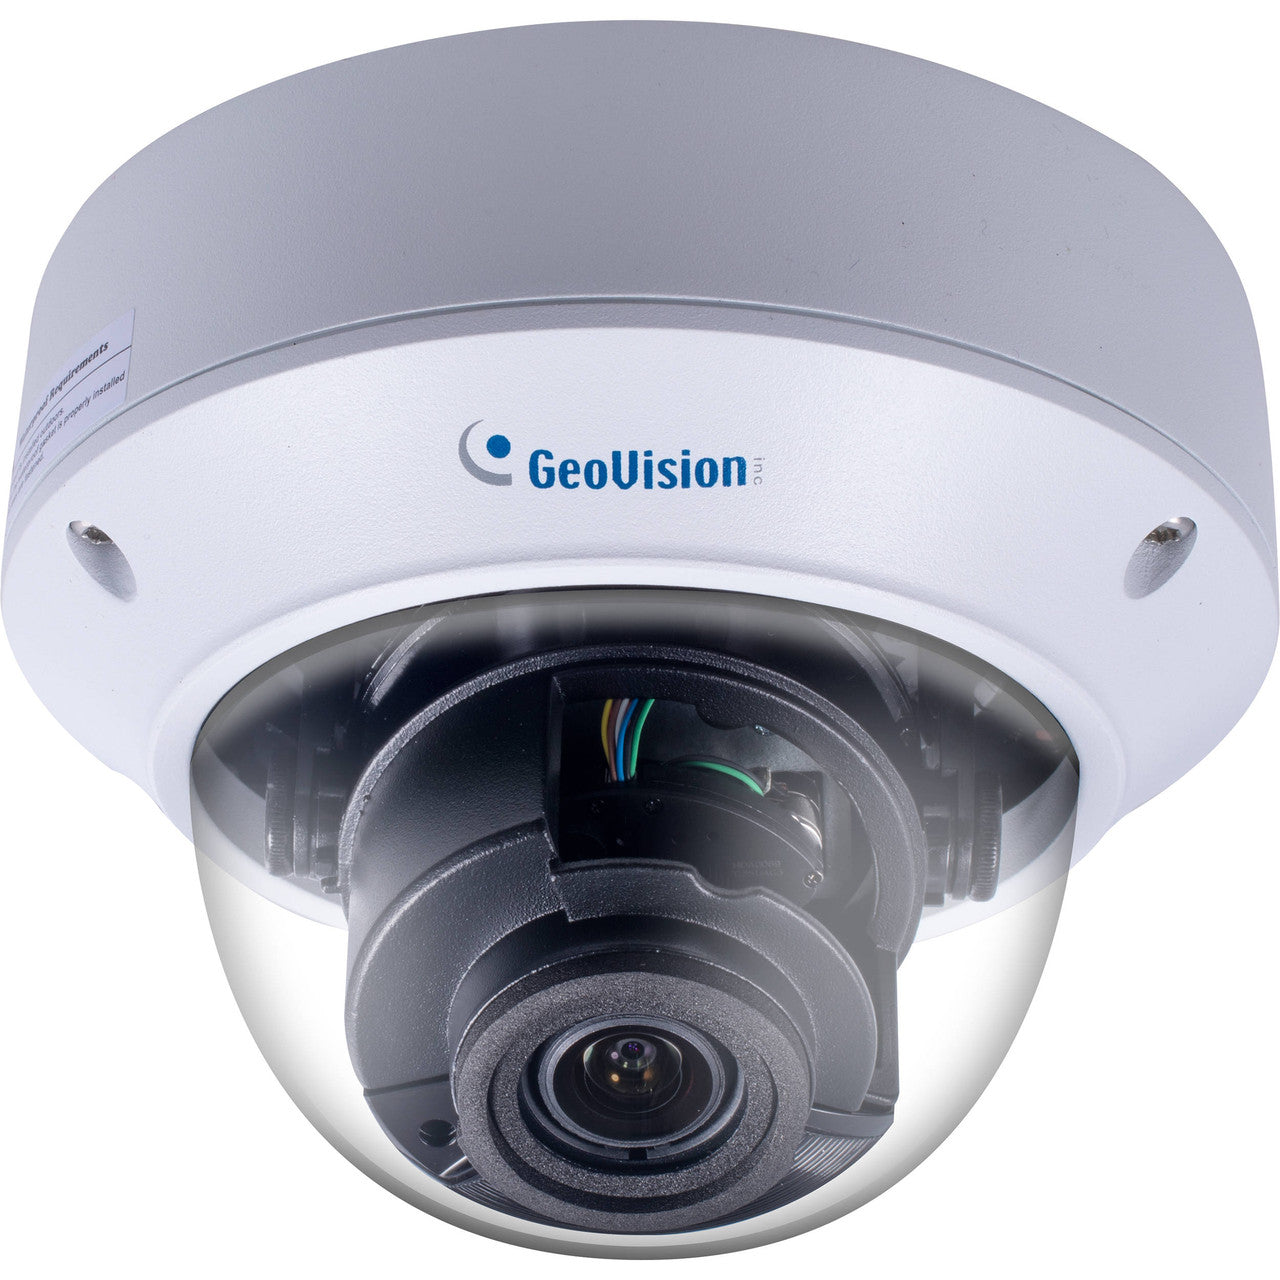 GeoVision GV-TVD4710 4MP Low Lux  Vandal Proof Dome Network Camera